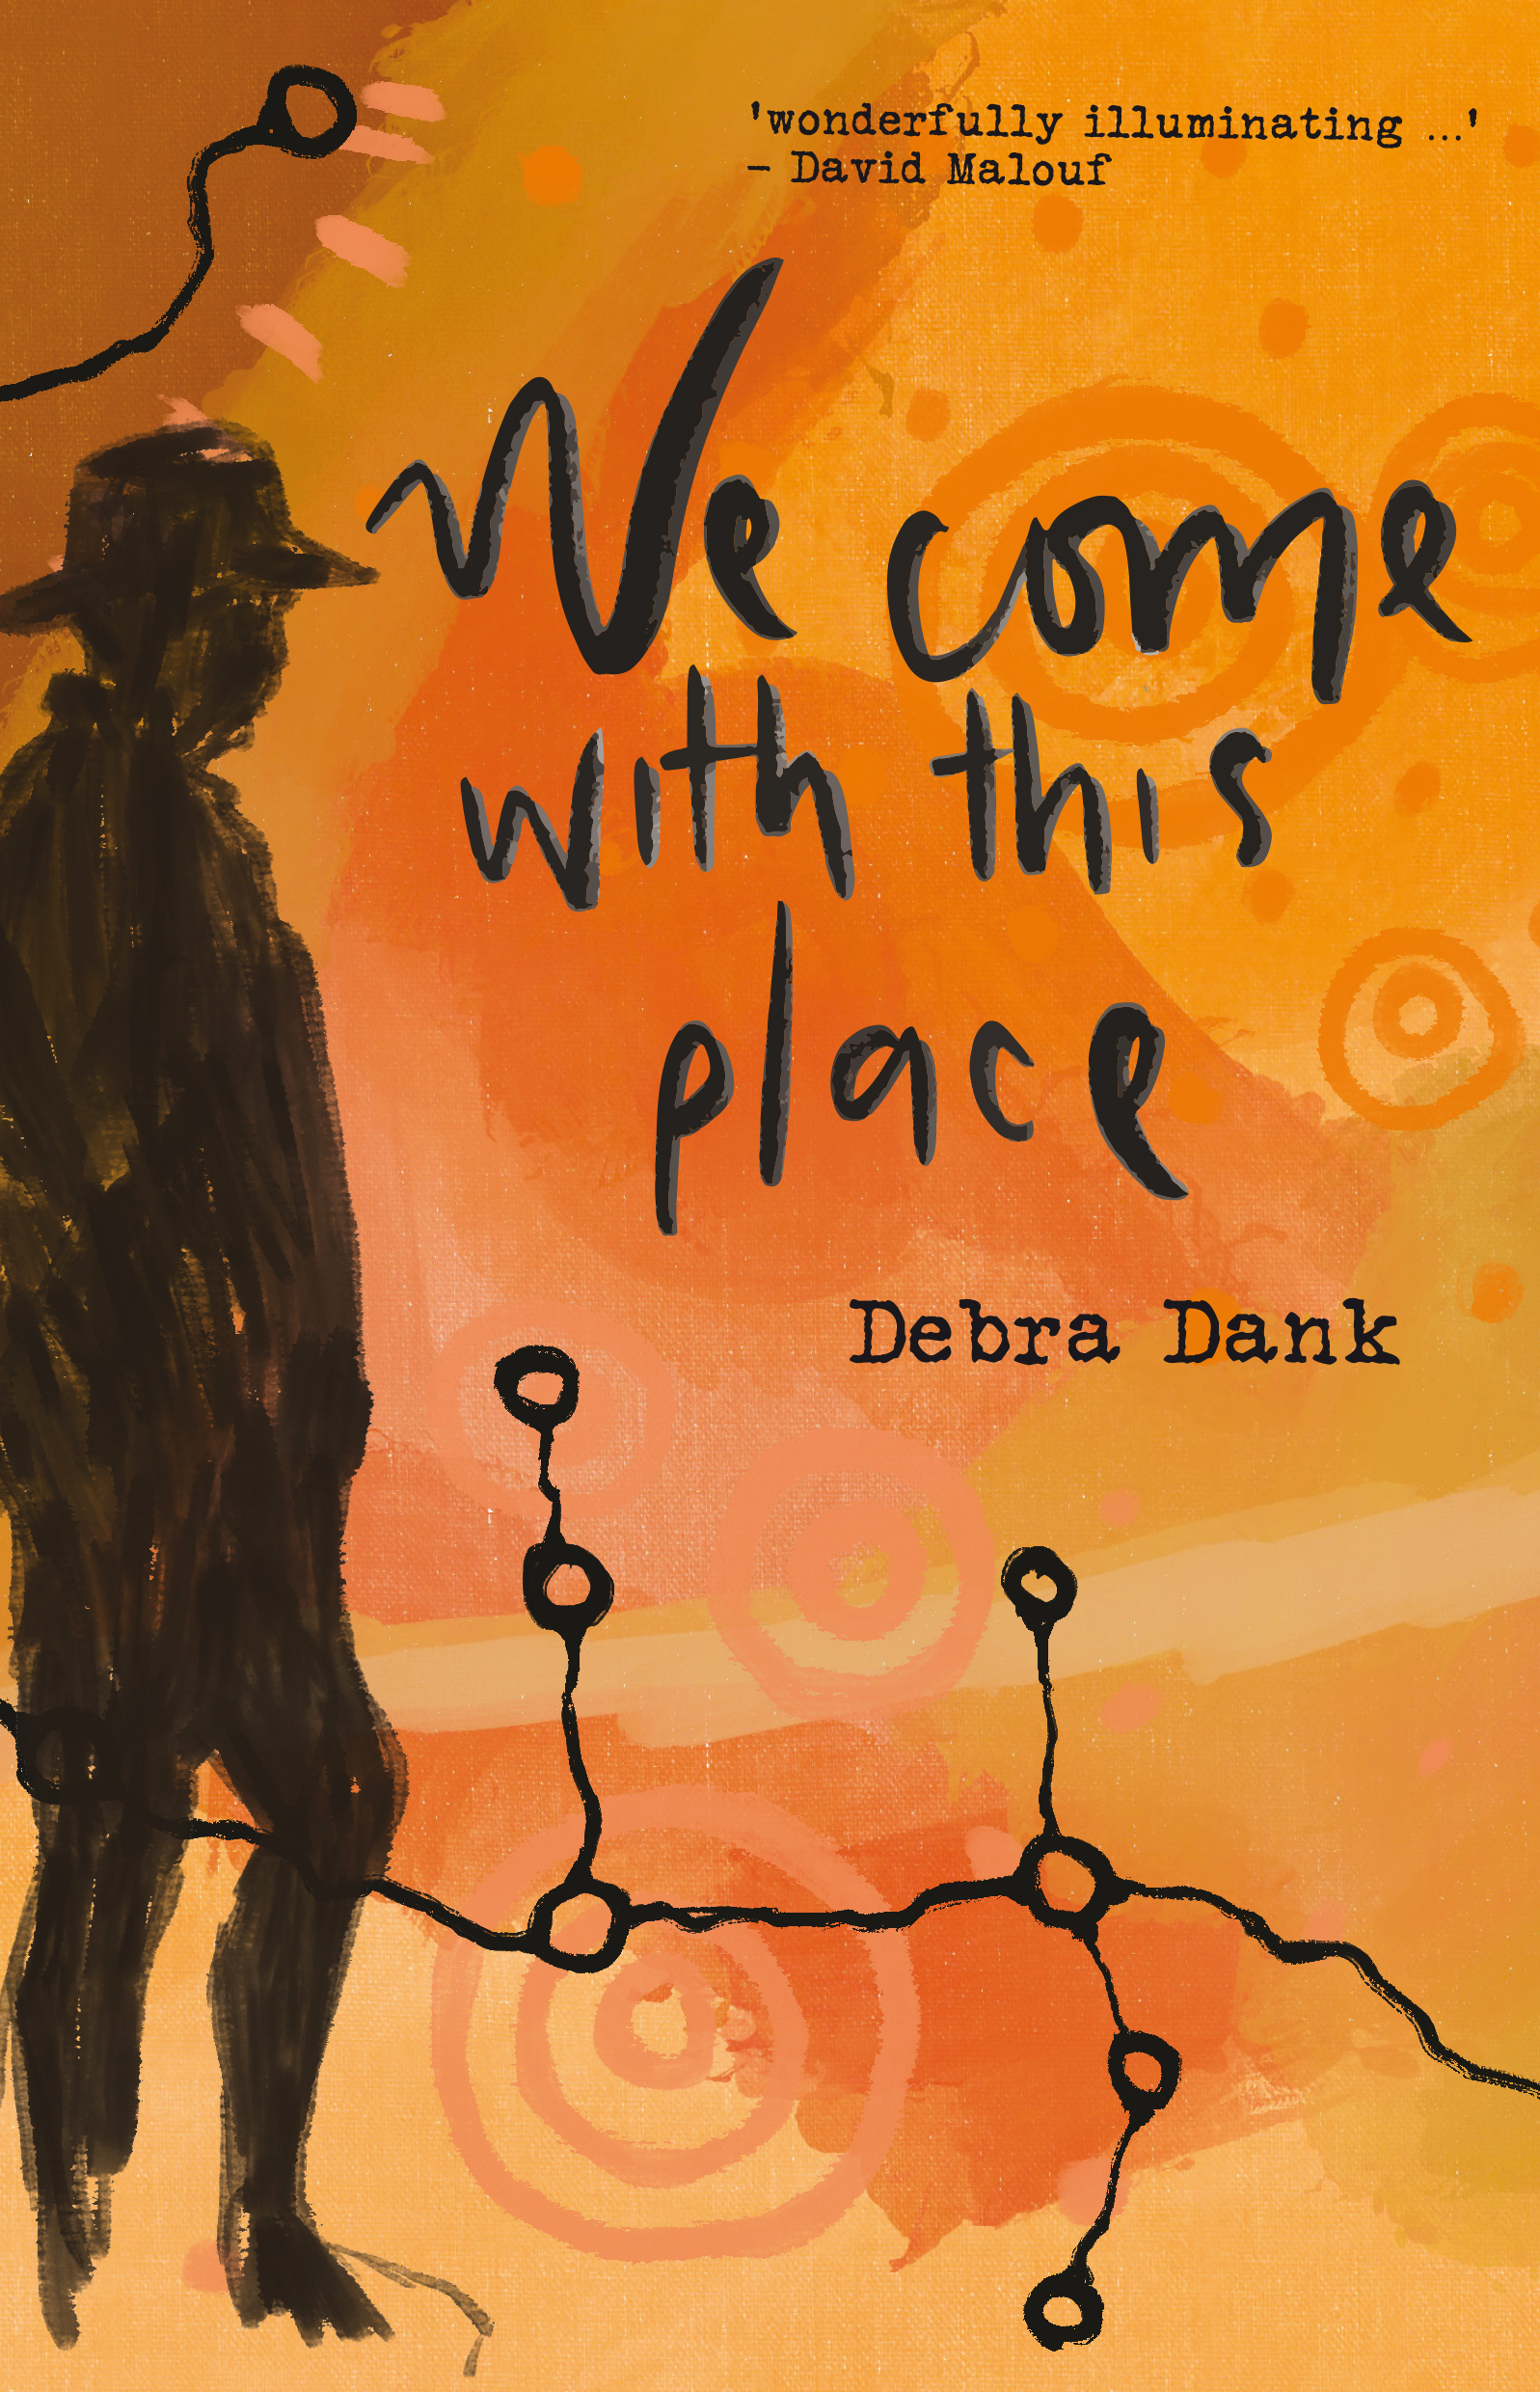 An orange book cover featuring a shadowy human figure wearing a hat, and the title We Come With This Place.